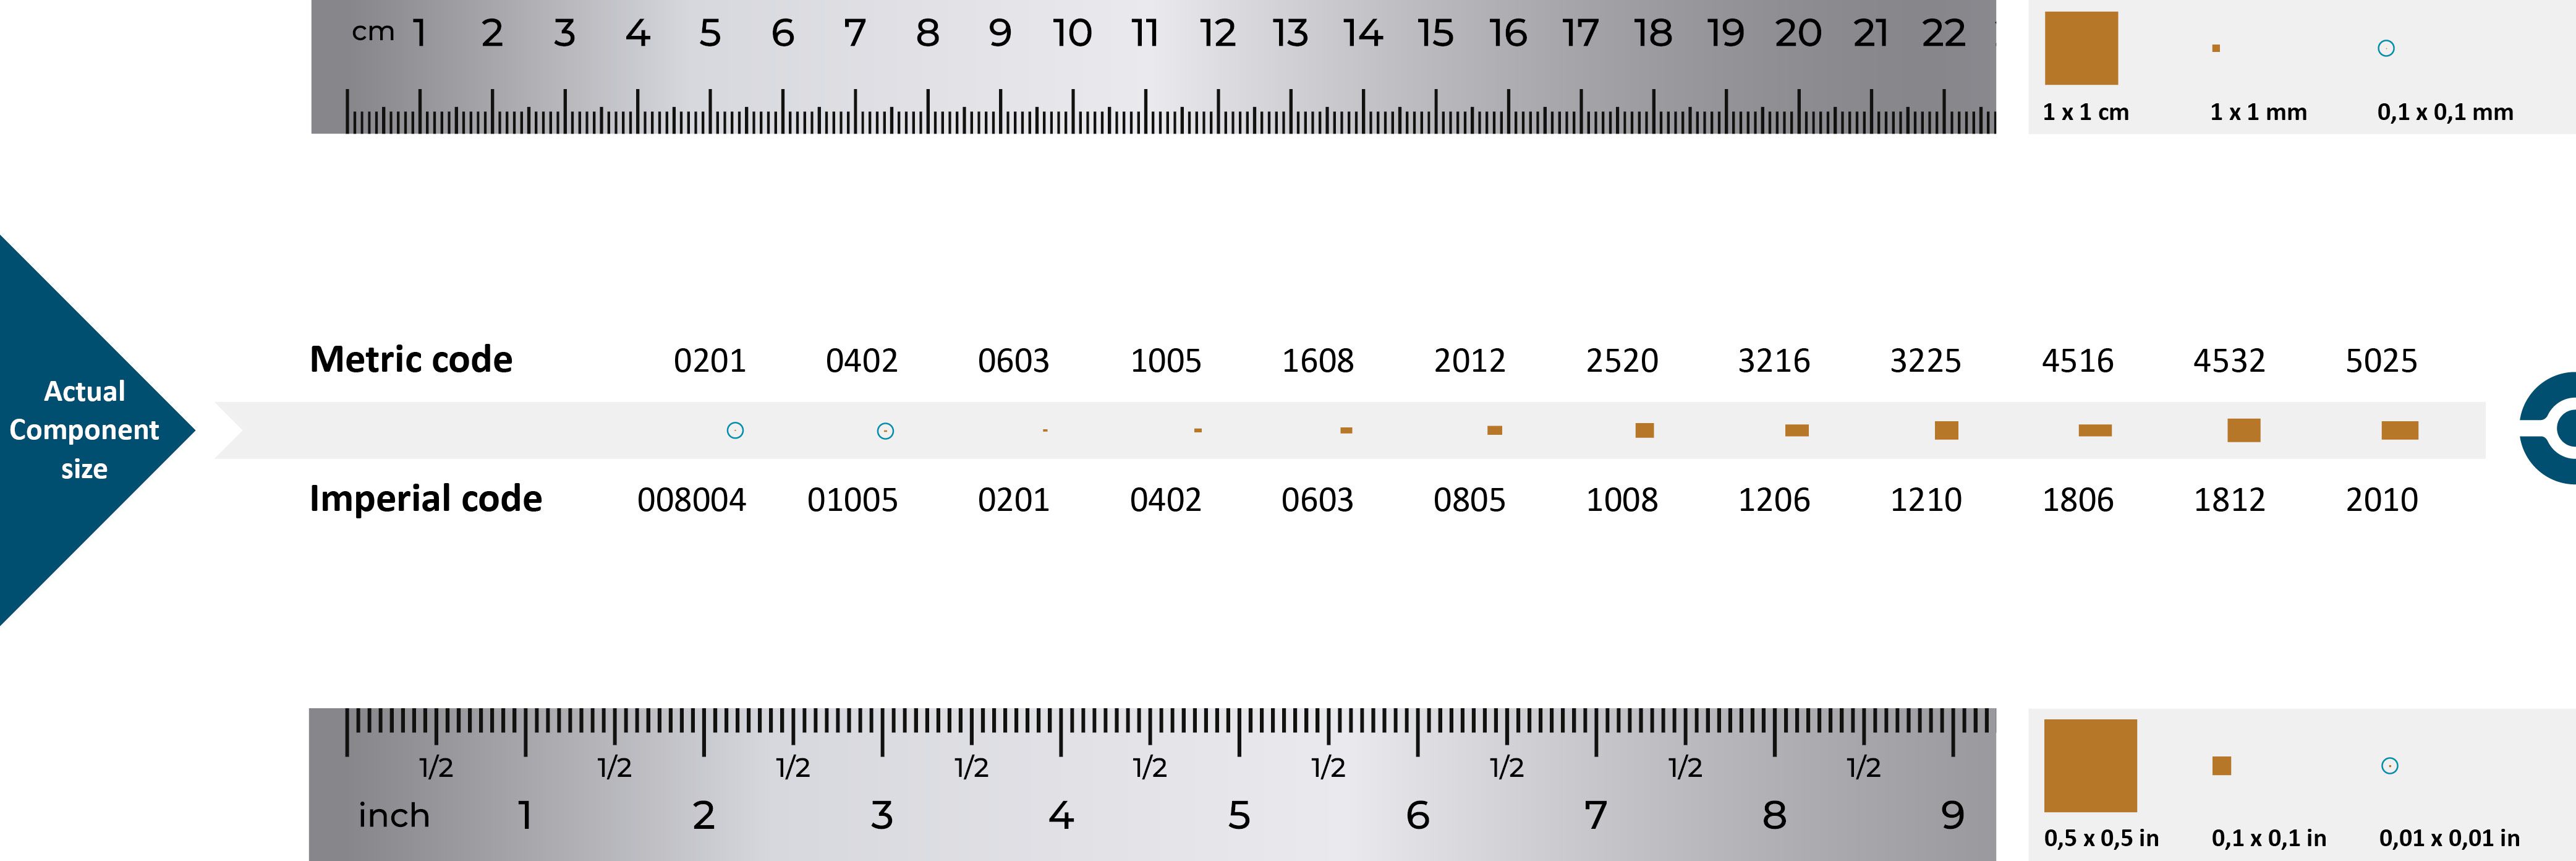 SMD size chart with SMD size code in Imperial and Metric. Download this SMD size chart.